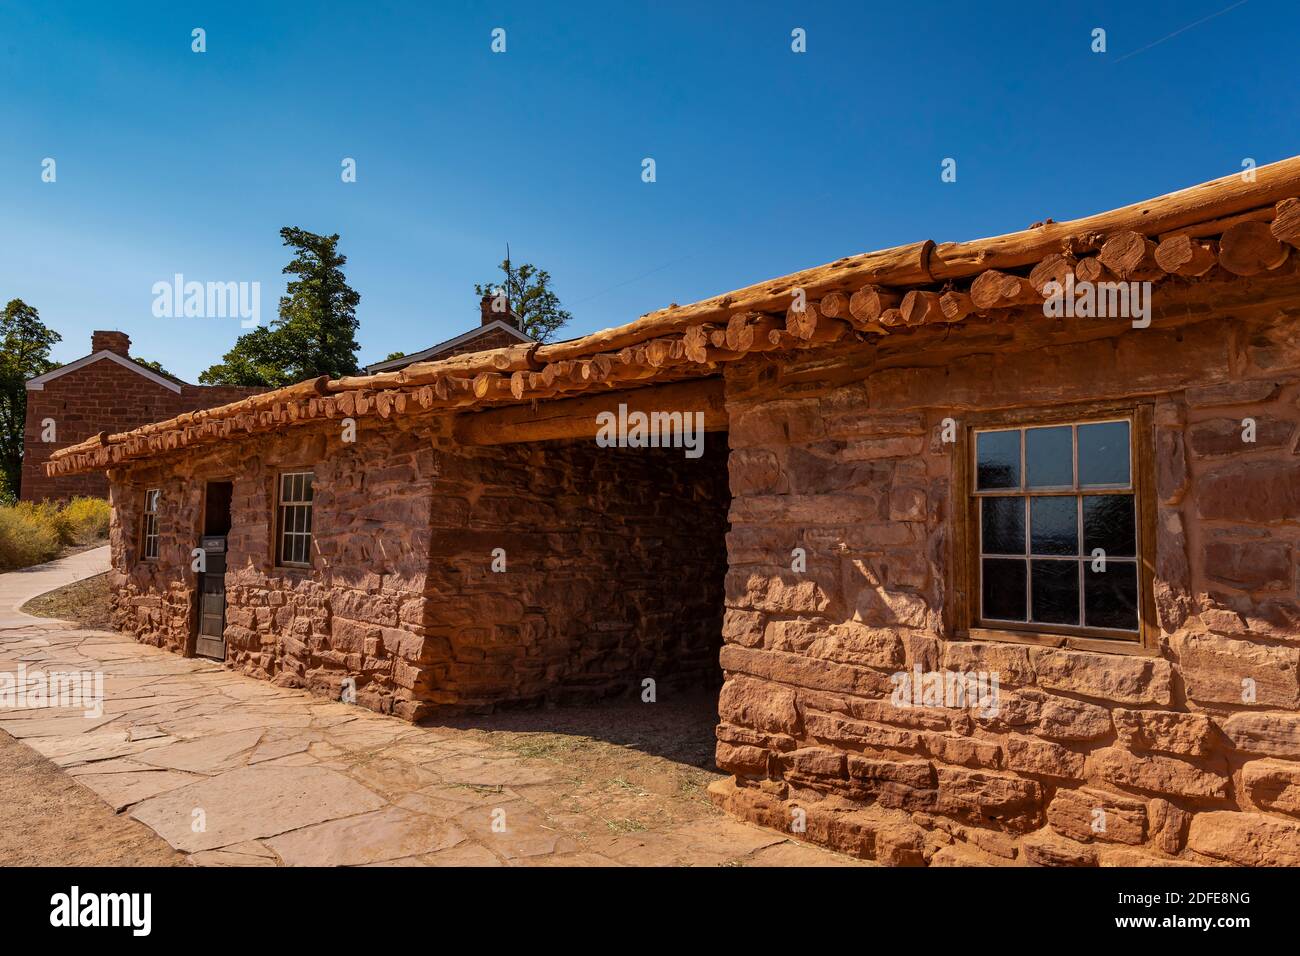 Log and stone cabin at Pipe Spring National Monument, Arizona, USA Stock Photo